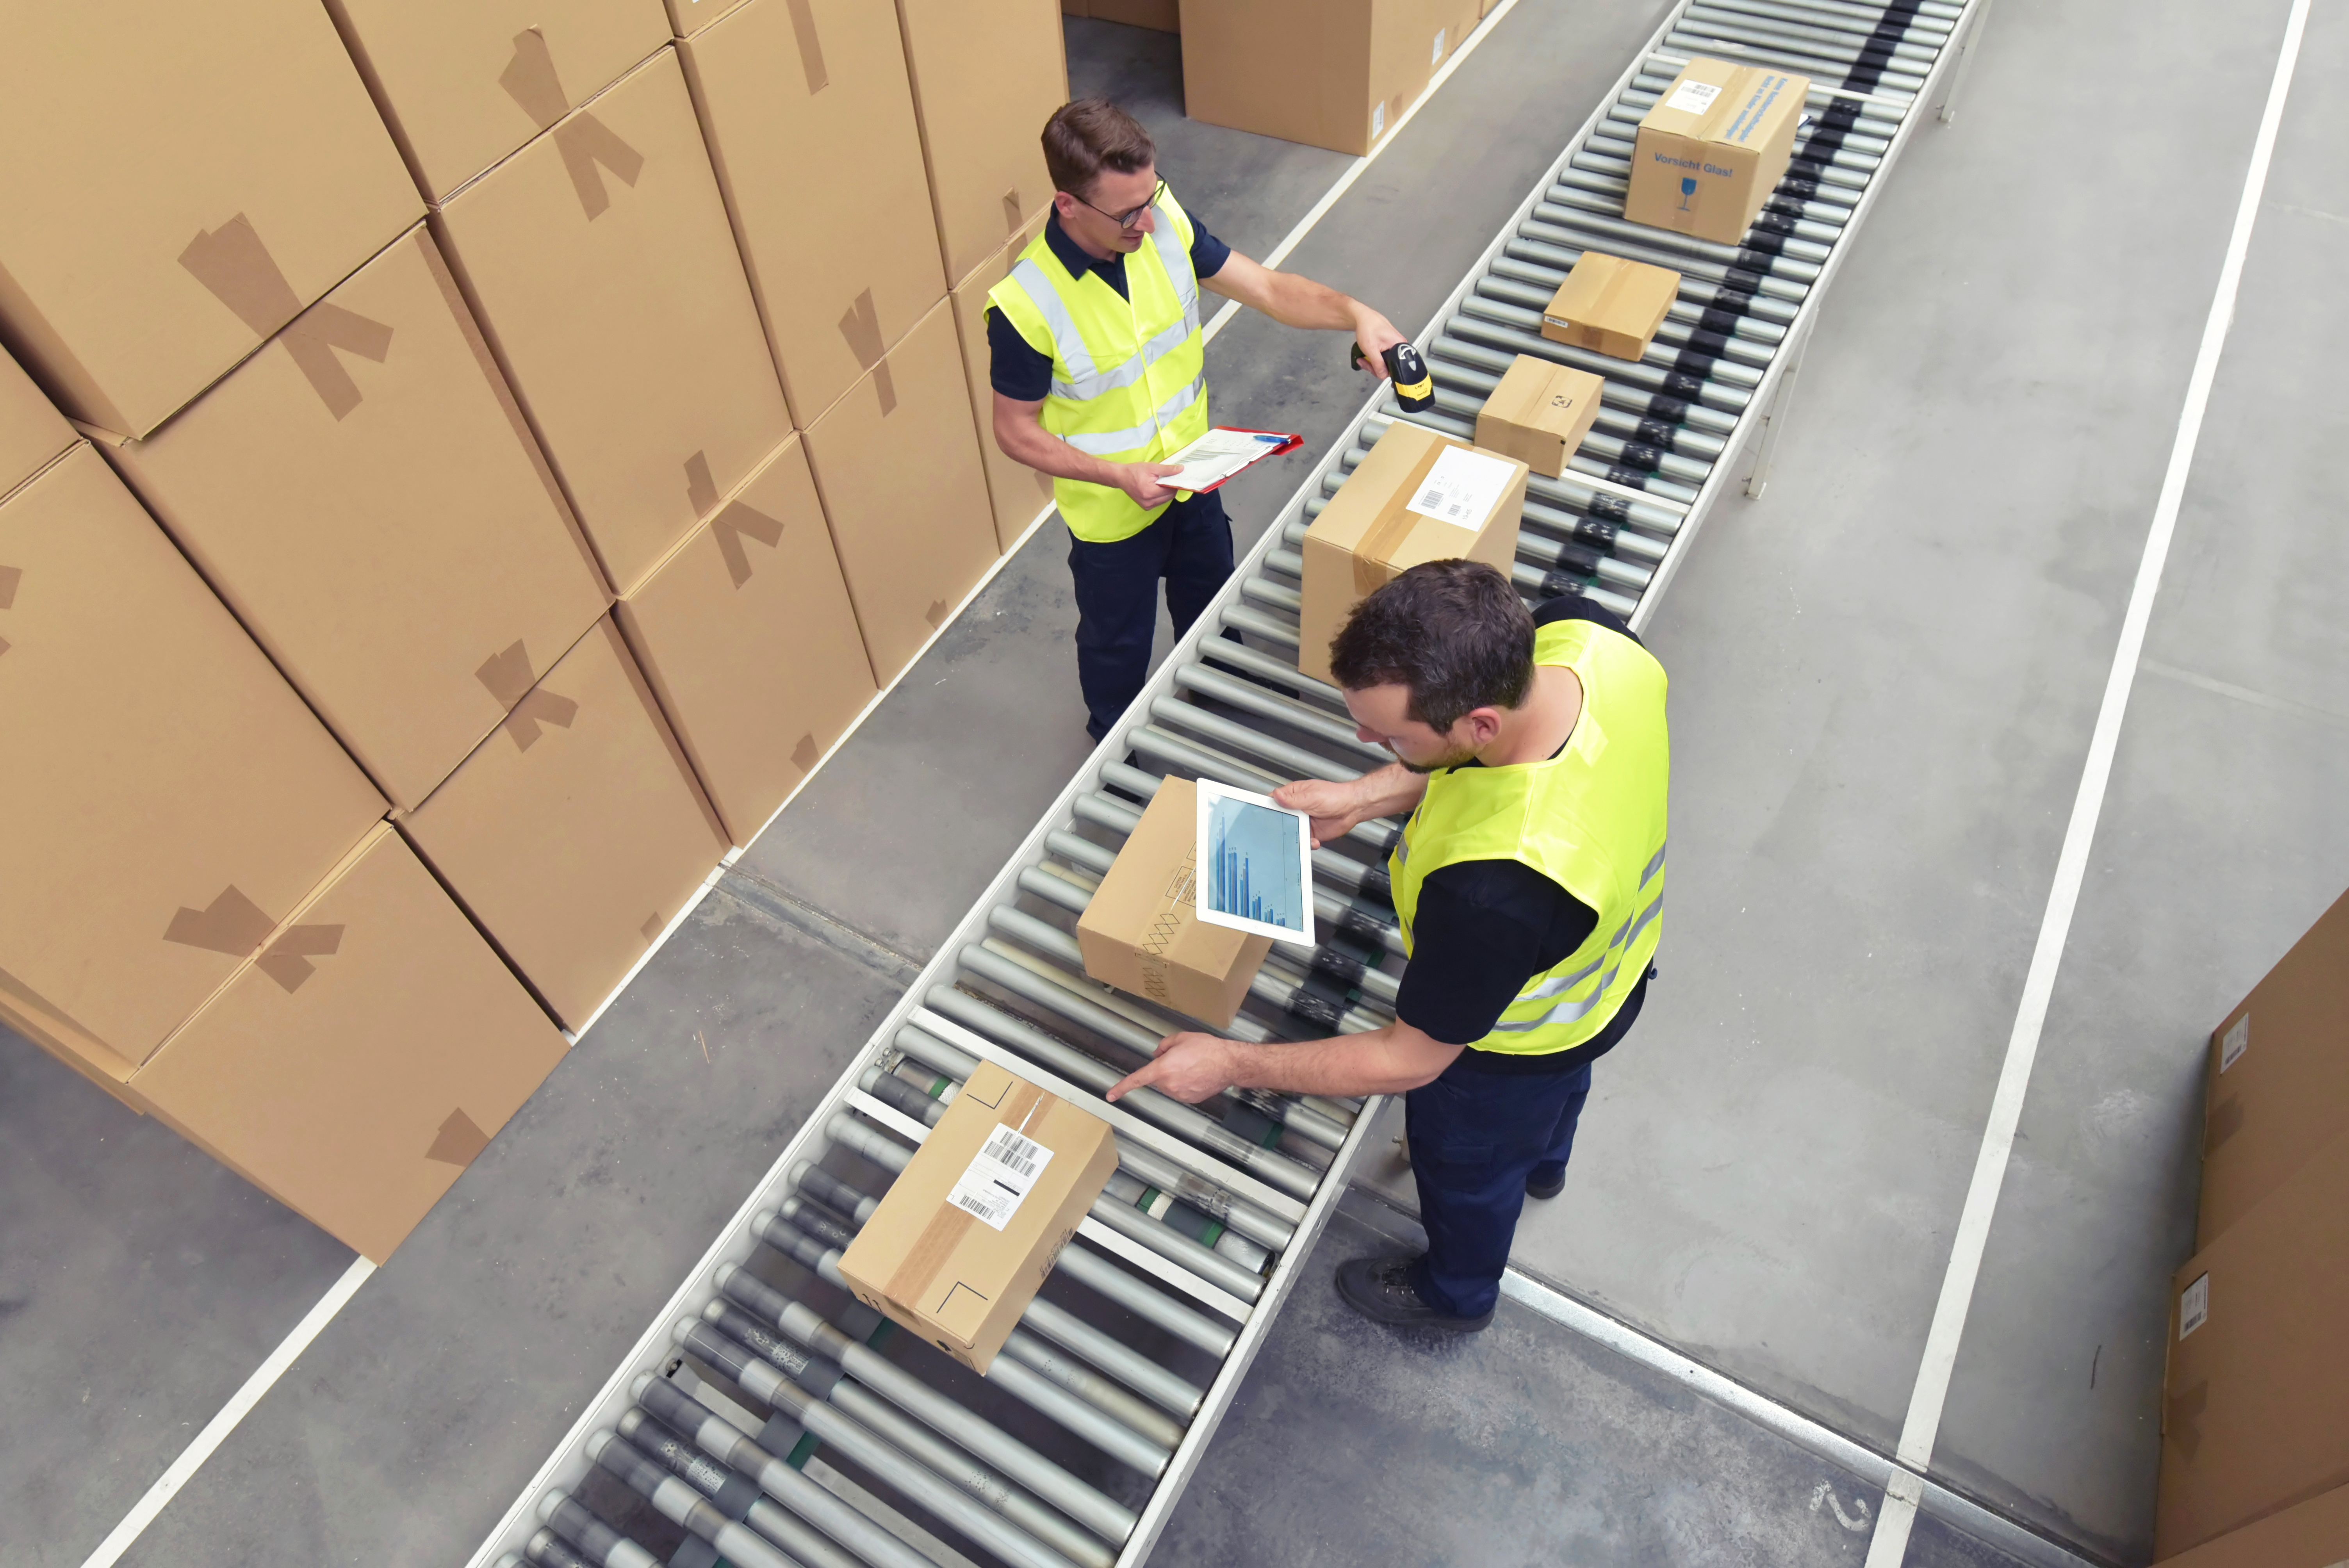 Overhead View of Two Men in Safety Vests in a Shipping Warehouse